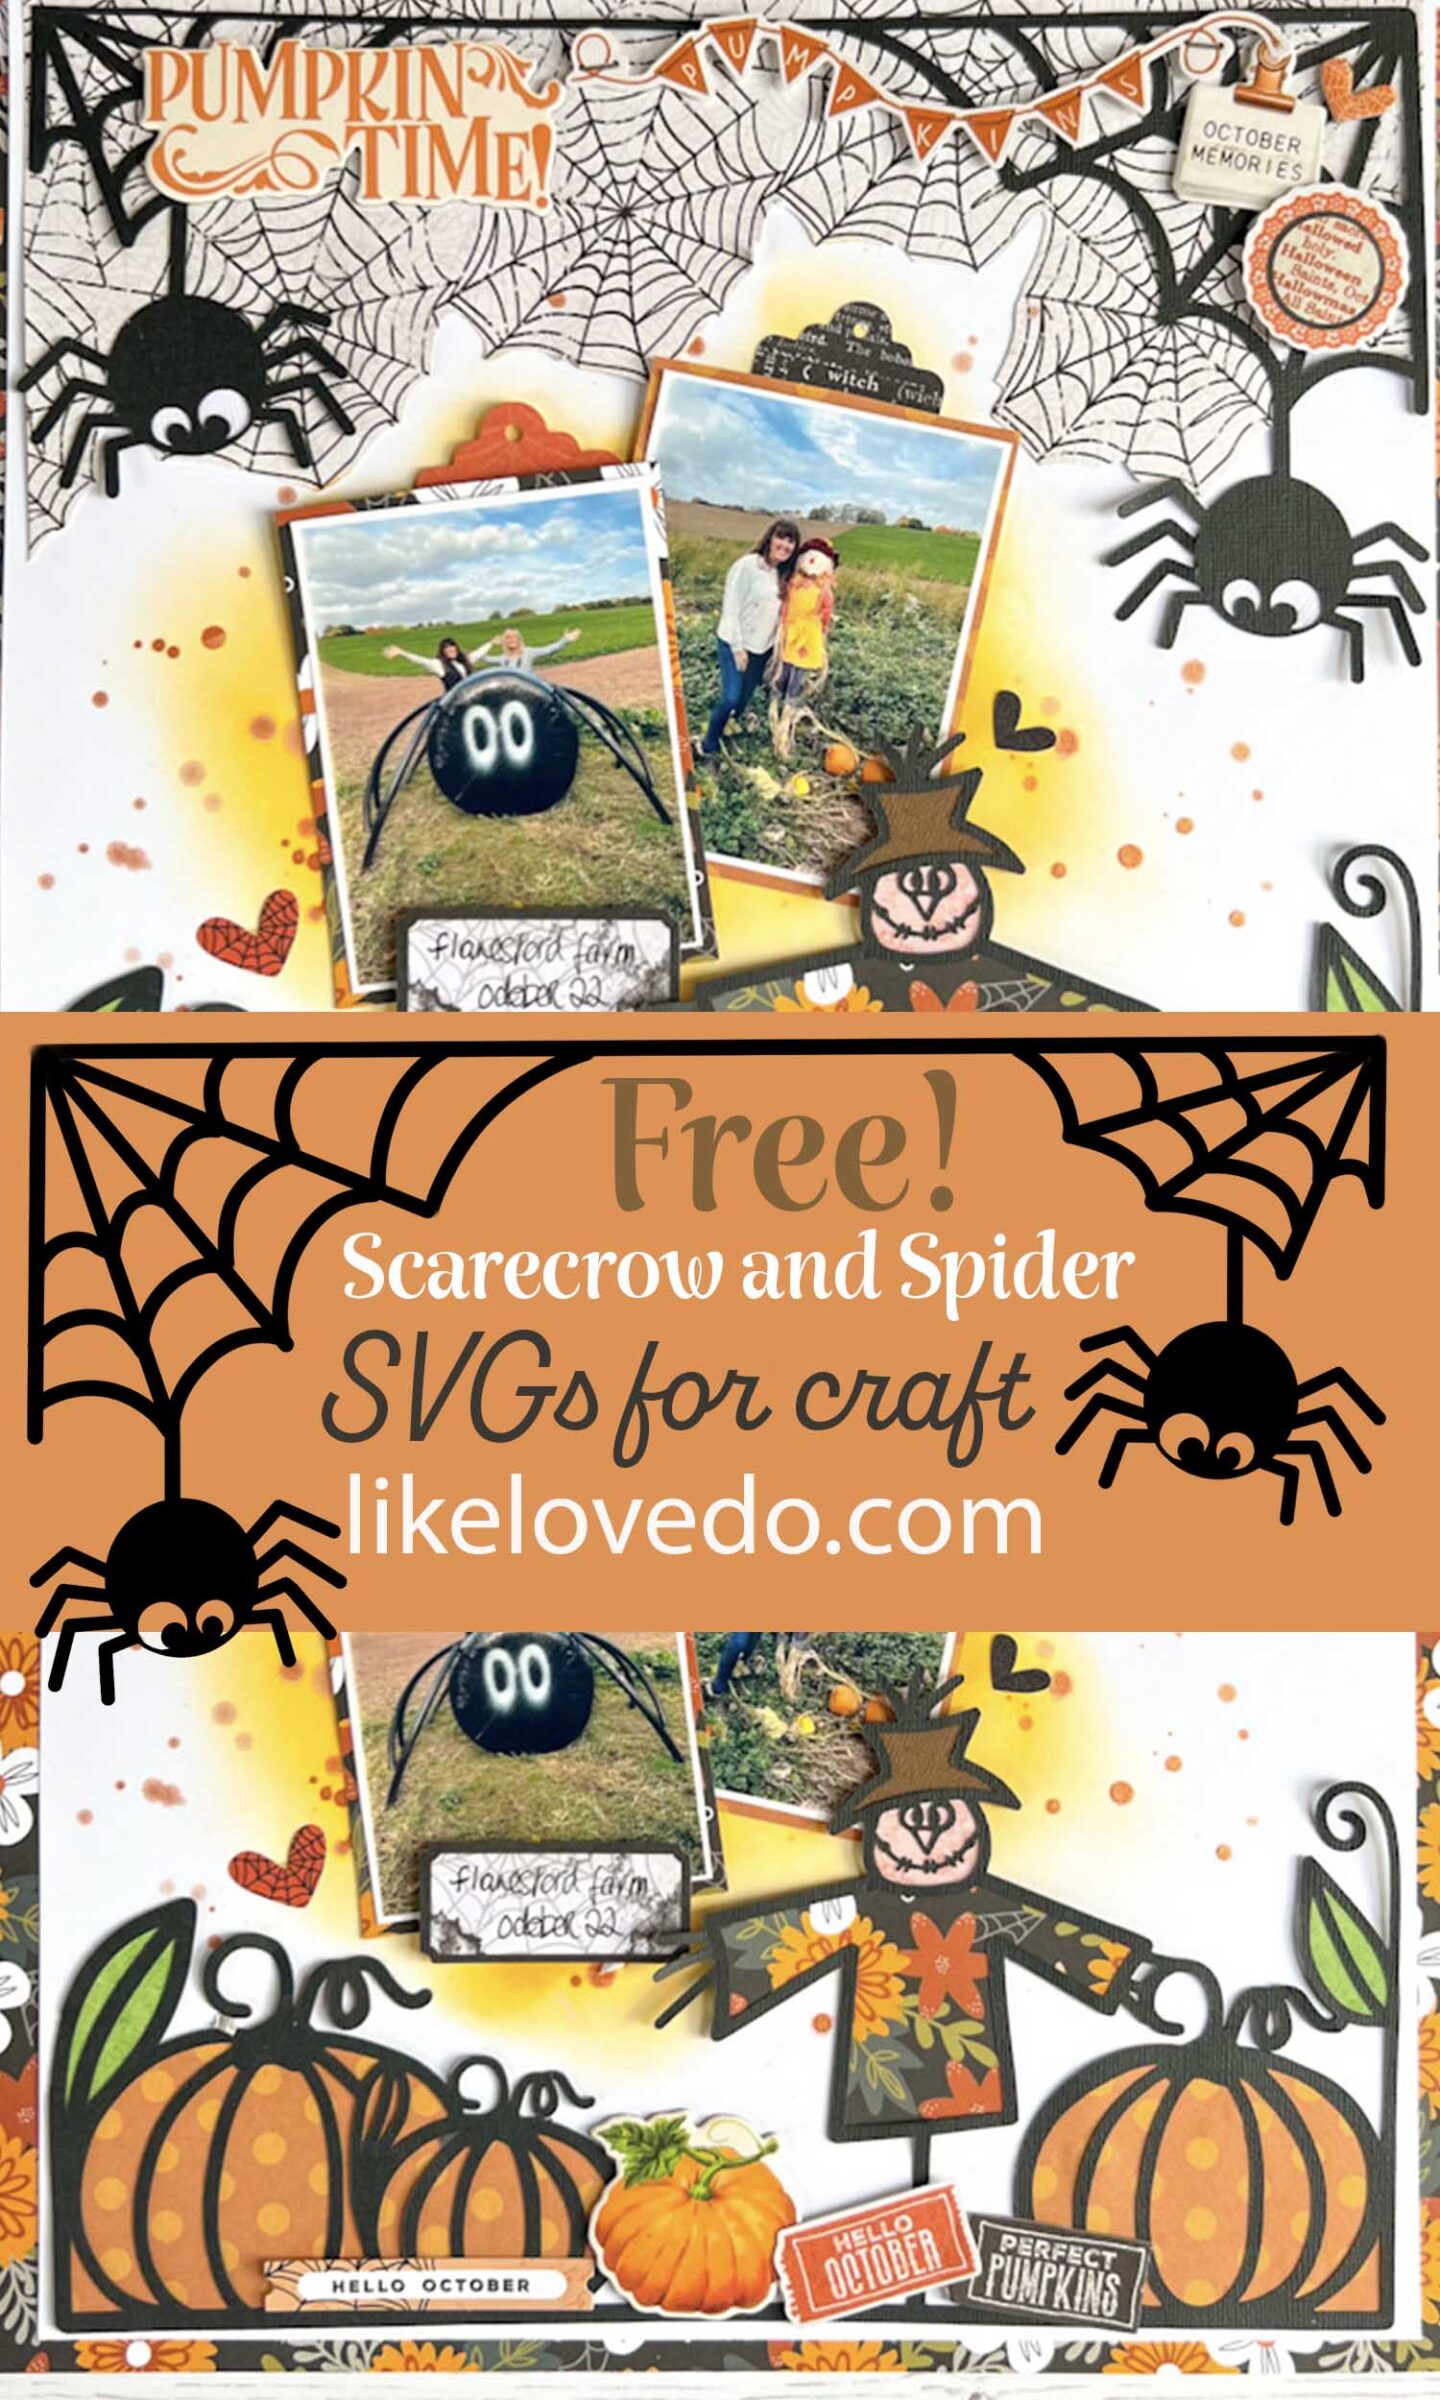 Two borders for Halloween & Autumn Scarecrow svgs scrapbooking pages free download pin image 